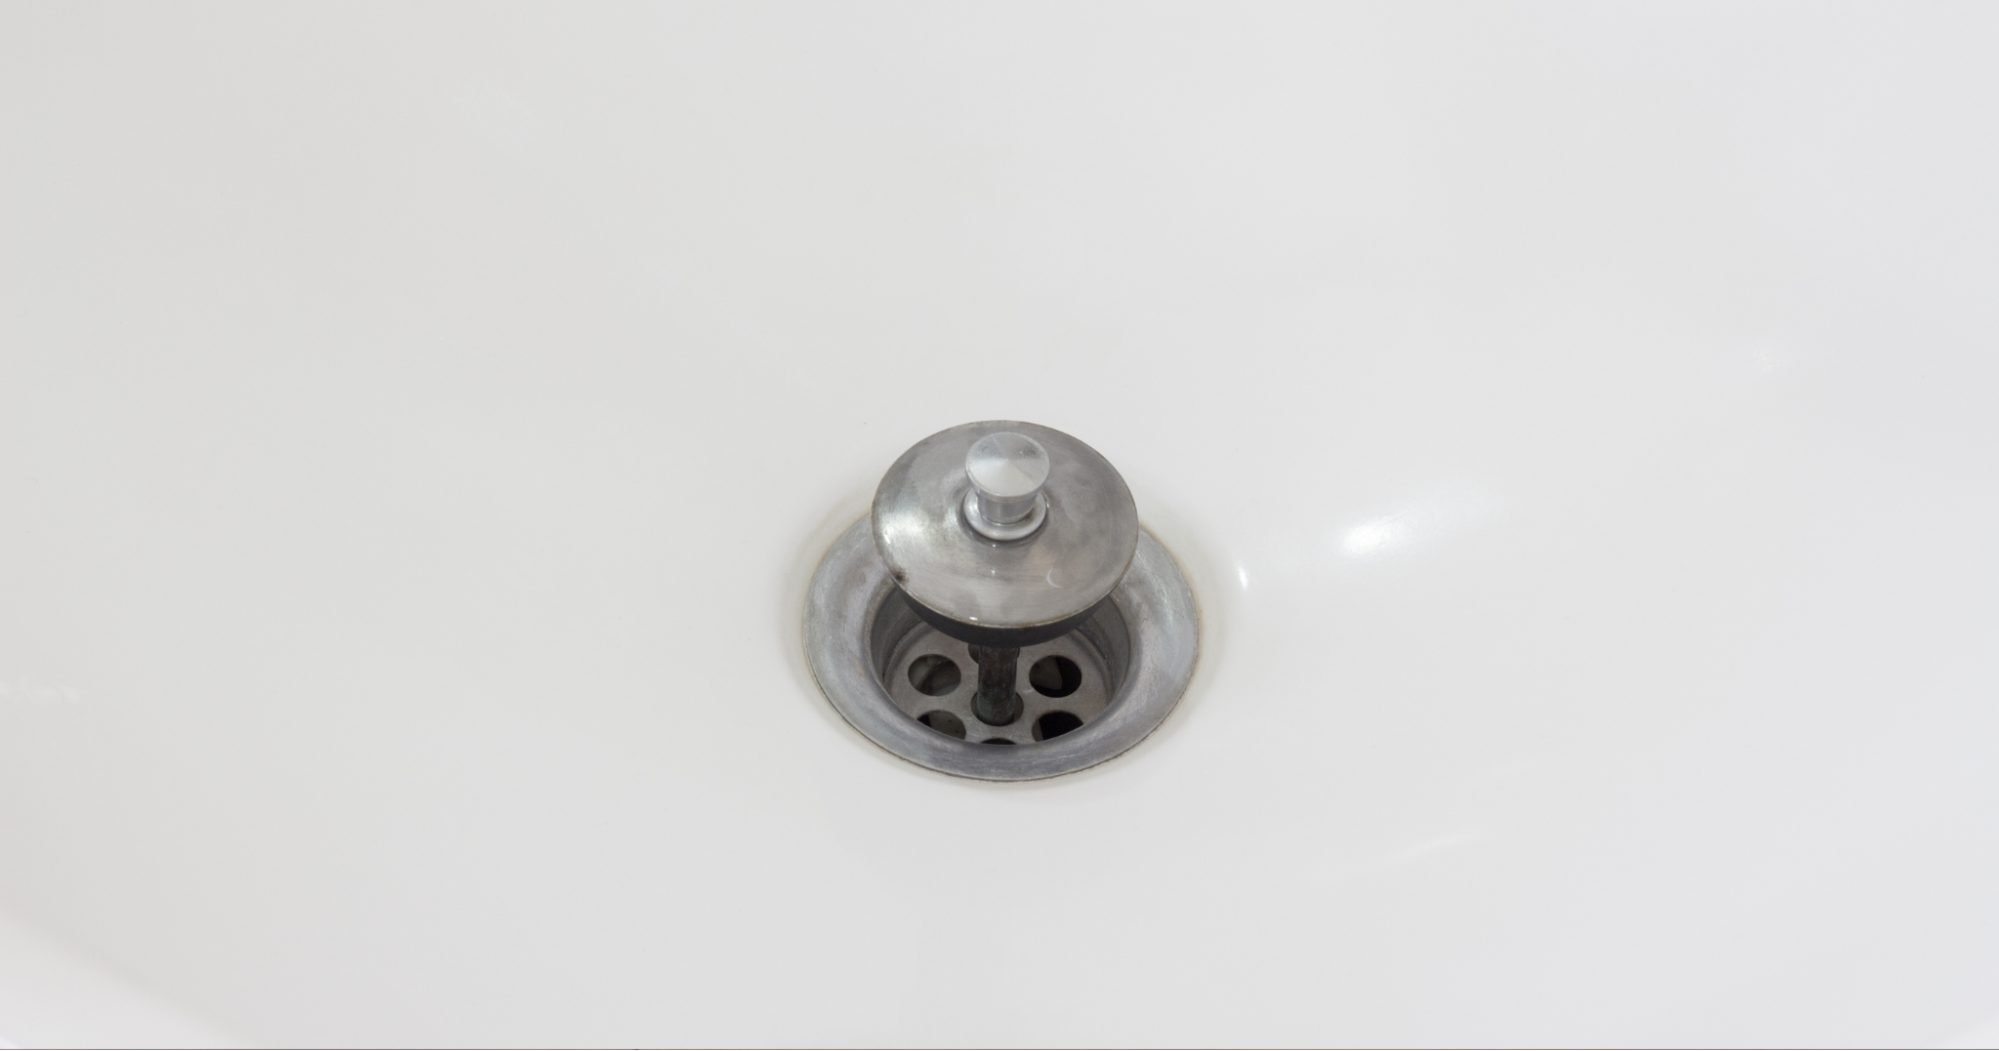 7 Different Types of Bathtub Drain Stoppers and How to Choose One